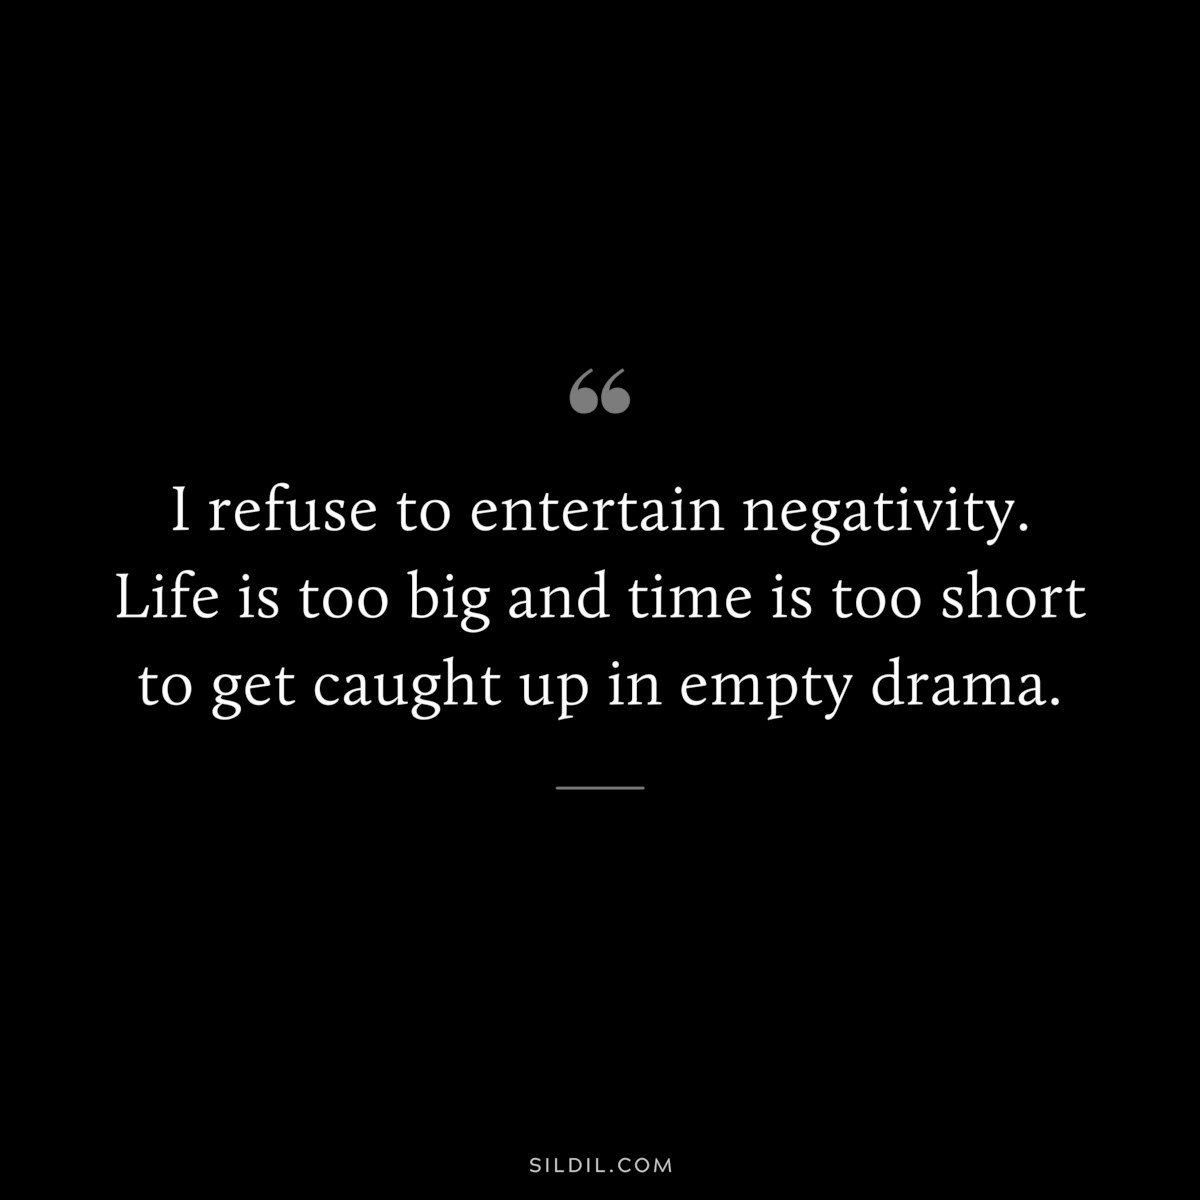 I refuse to entertain negativity. Life is too big and time is too short to get caught up in empty drama.